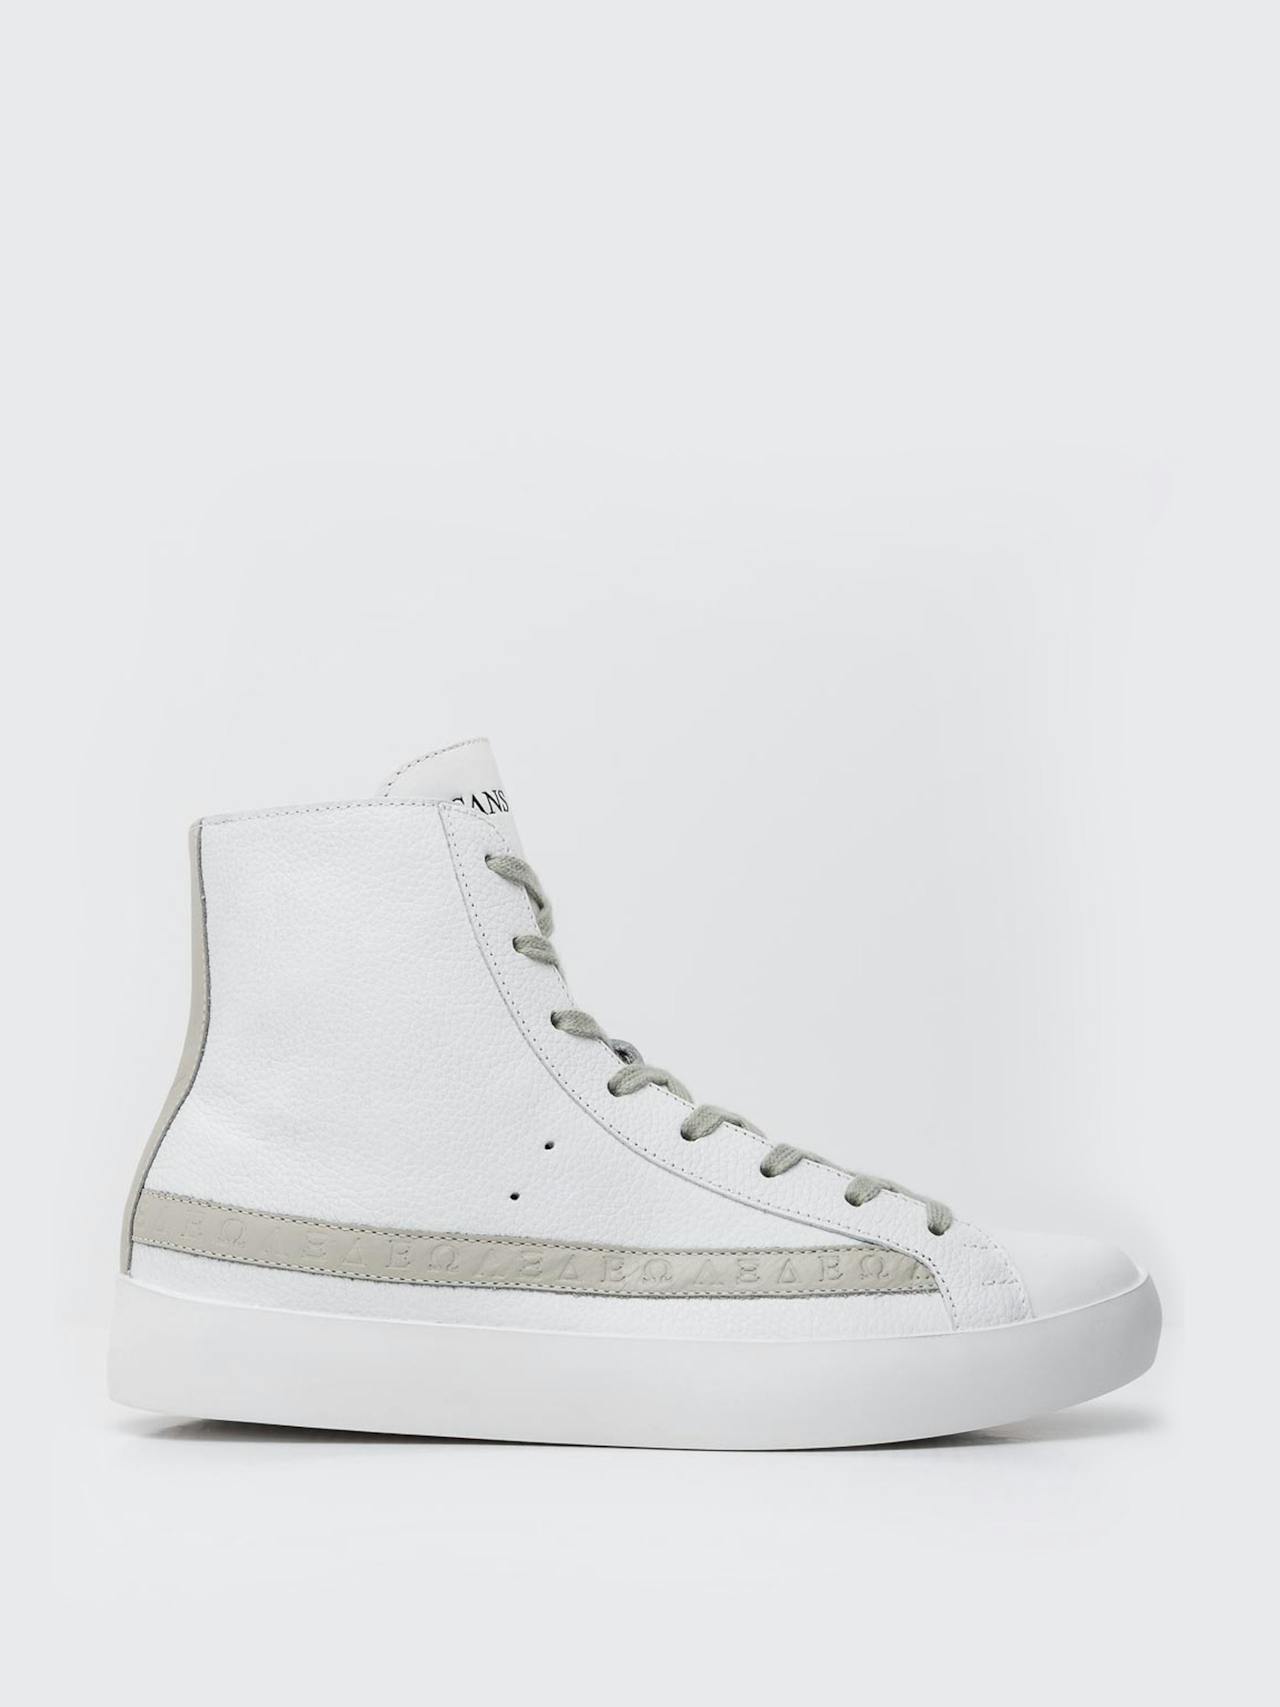 The Triple A high-top women's trainers